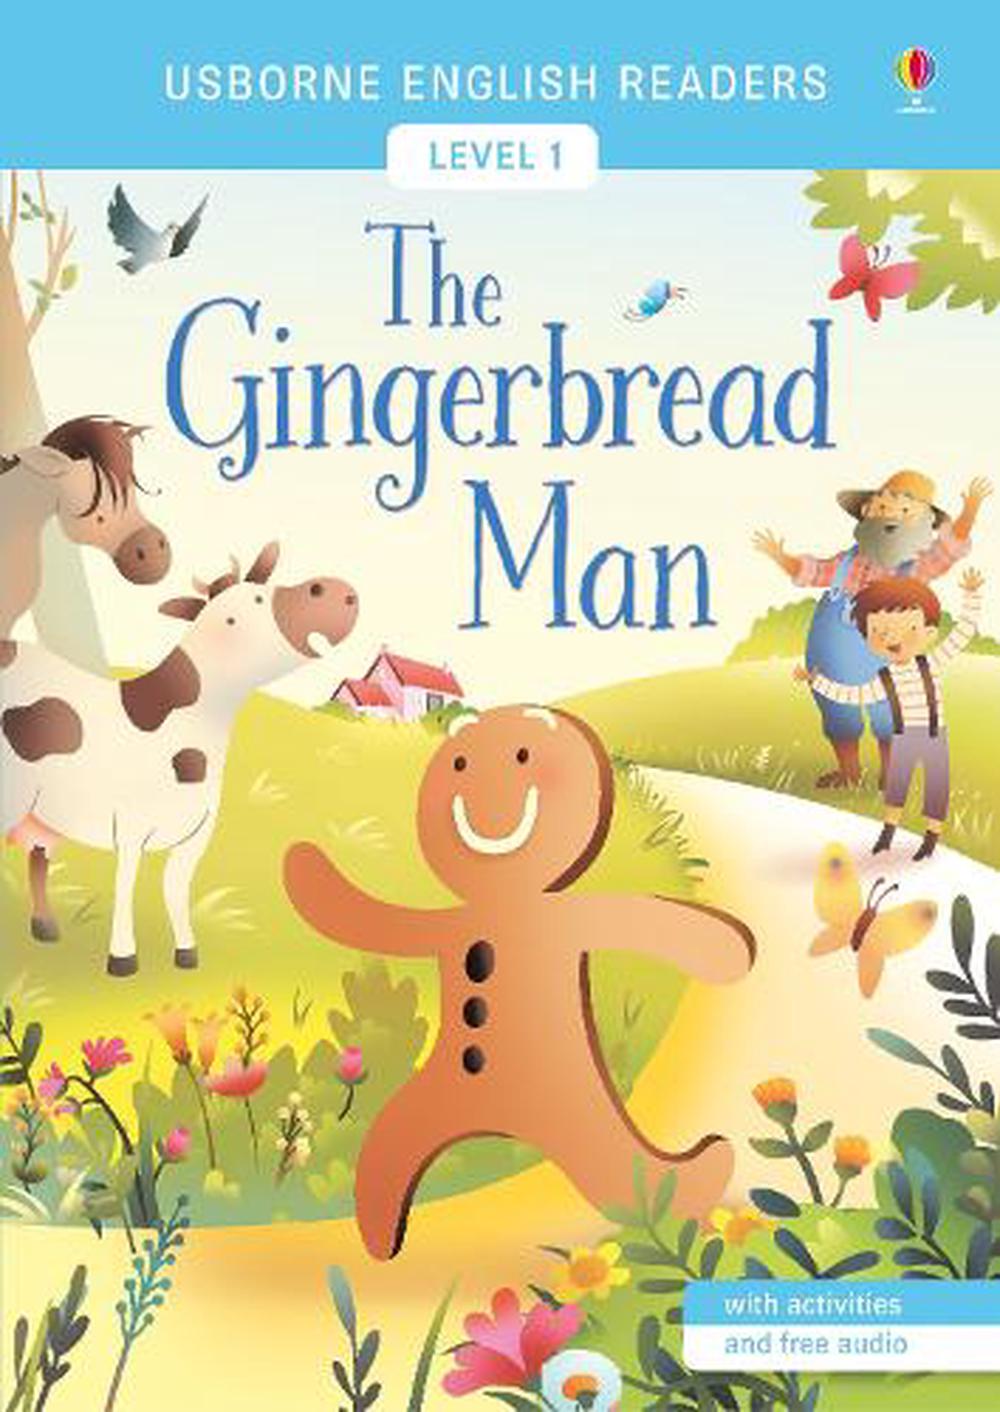 the gingerbread man by maggie shayne